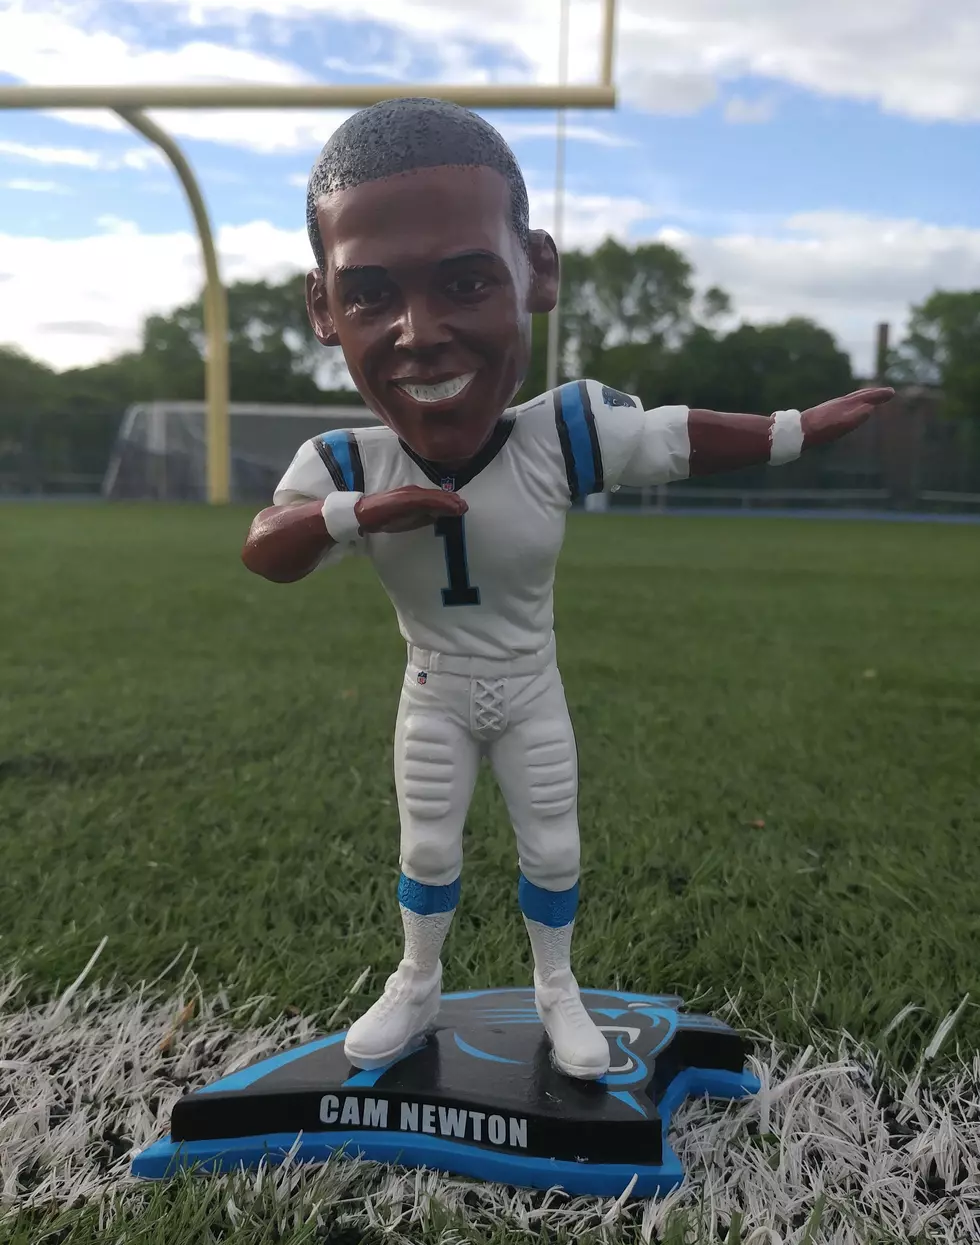 Limited Edition Cam Newton ‘Dabbing’ Bobblehead Unveiled